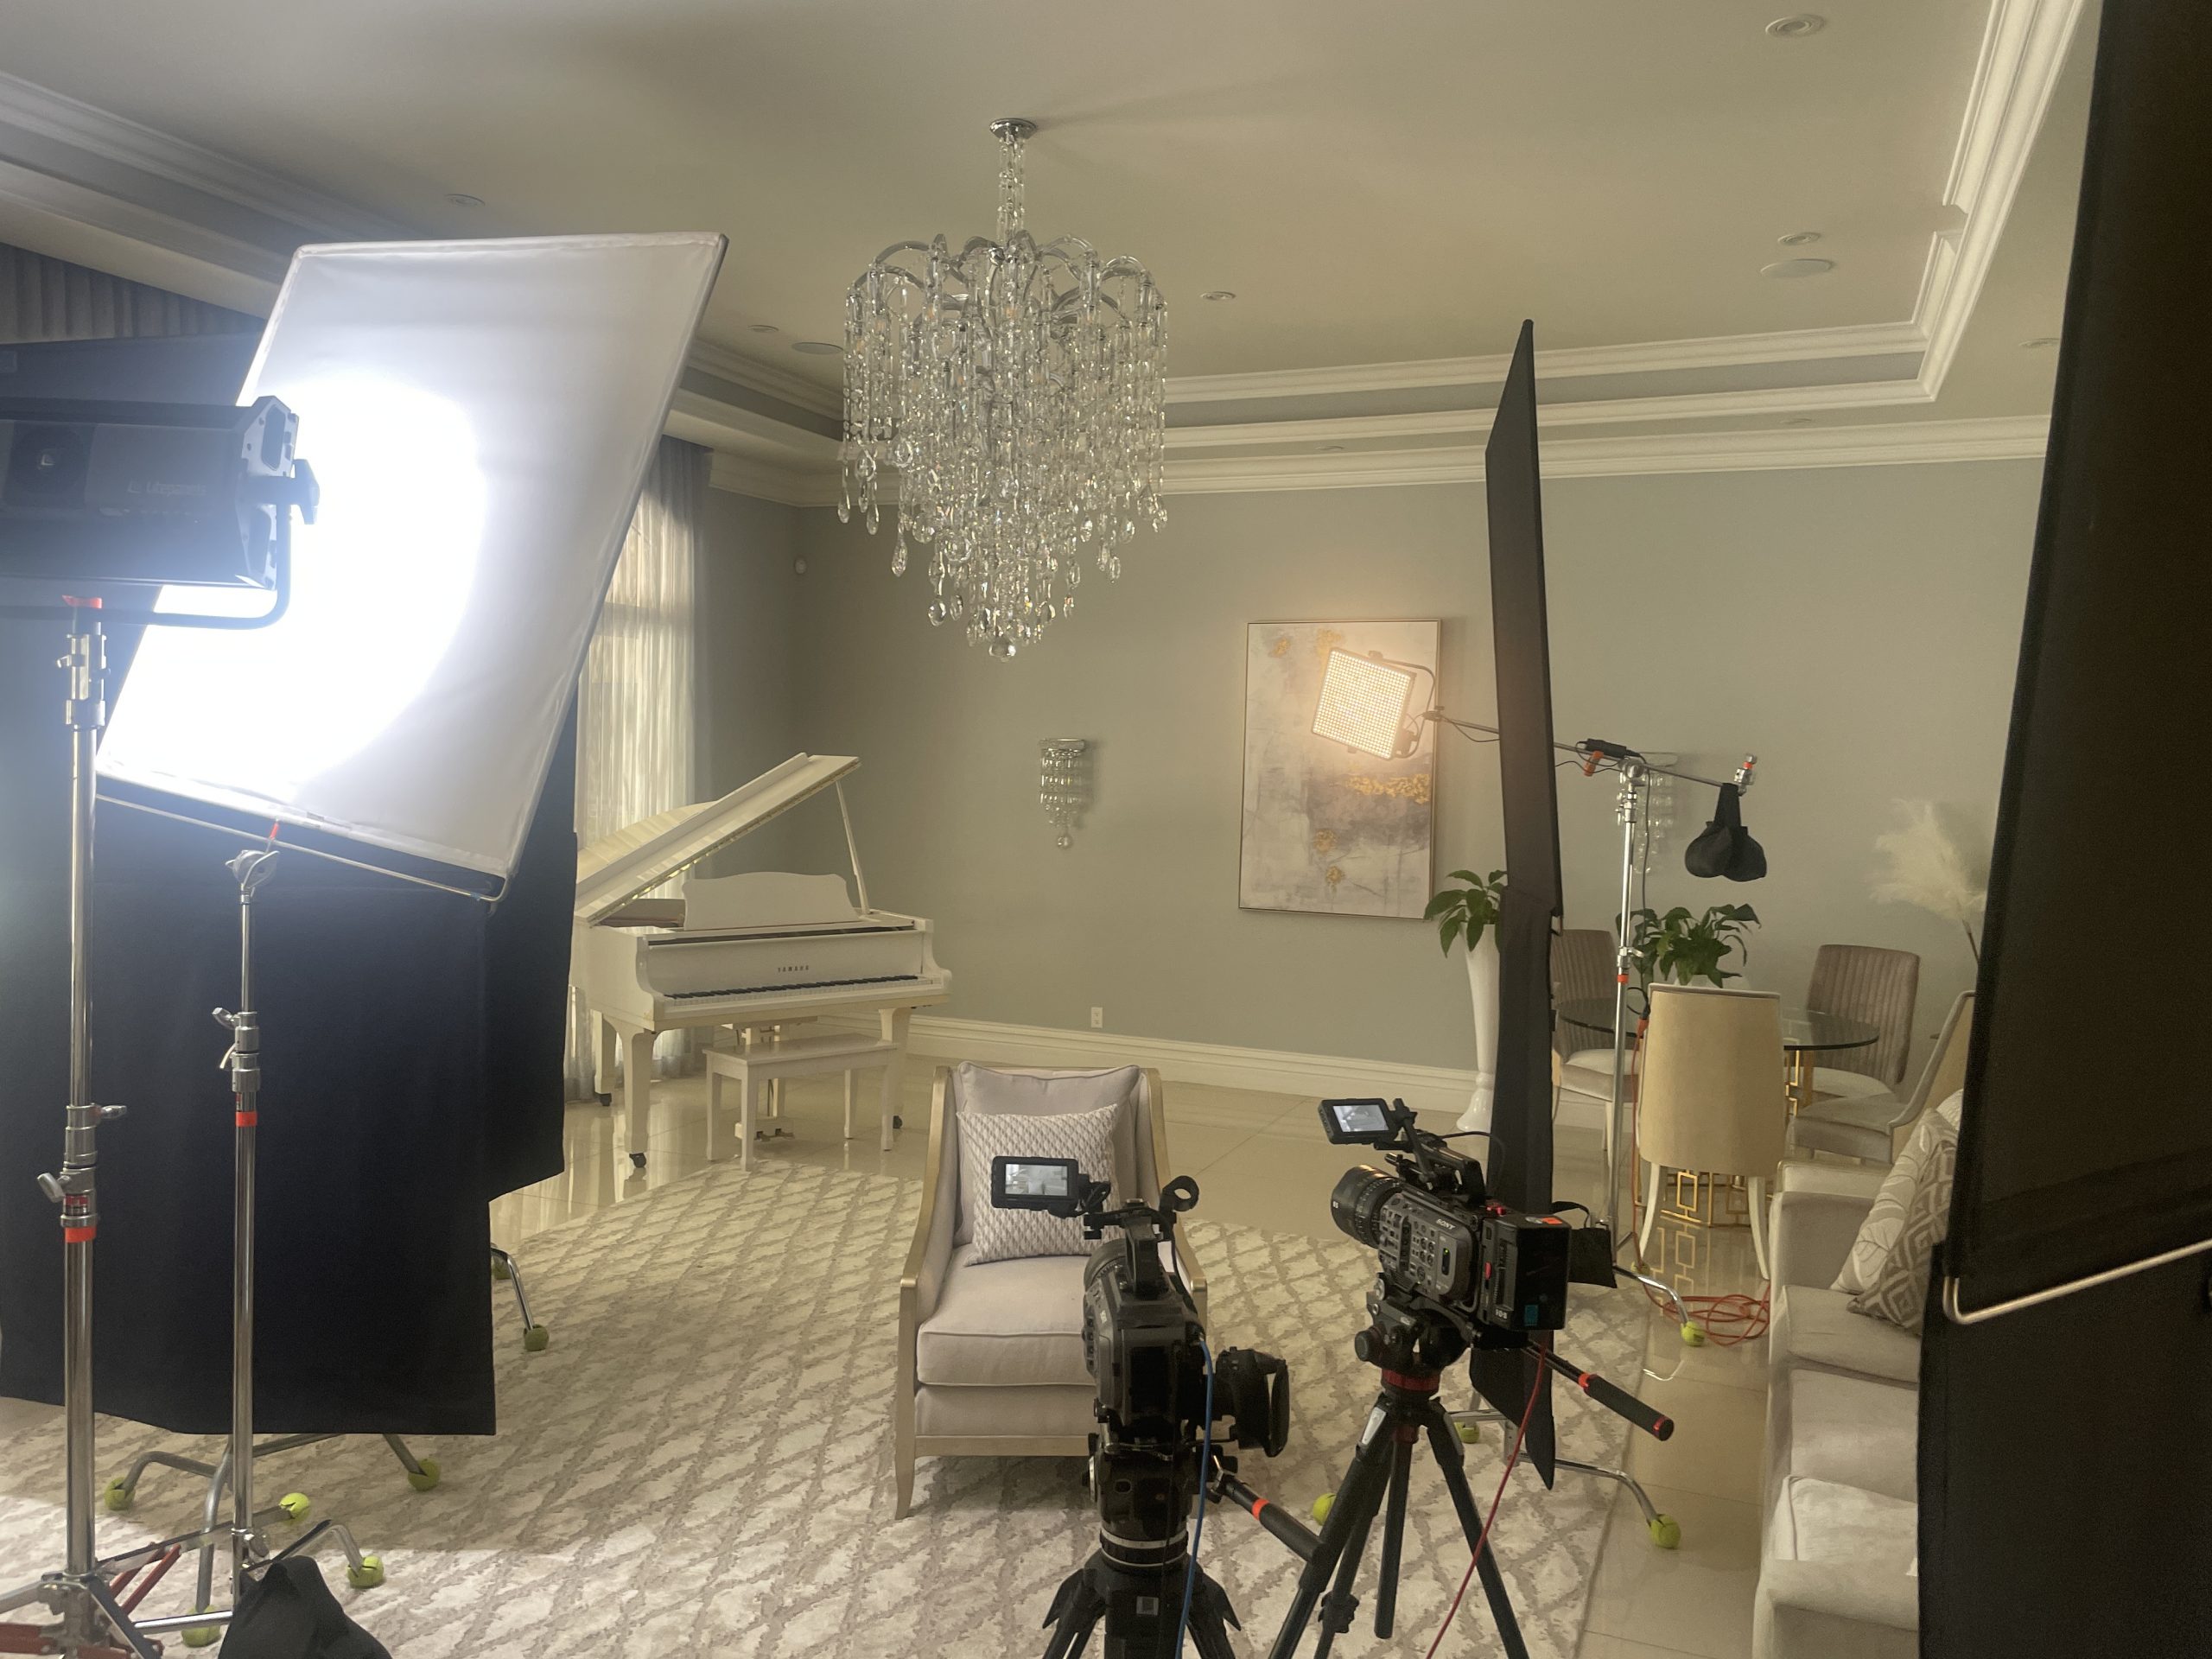 Documentary Production Company Key Components of a Documentary or Docuseries Two video cameras and lighting equipment on a set with chairs, table and white piano